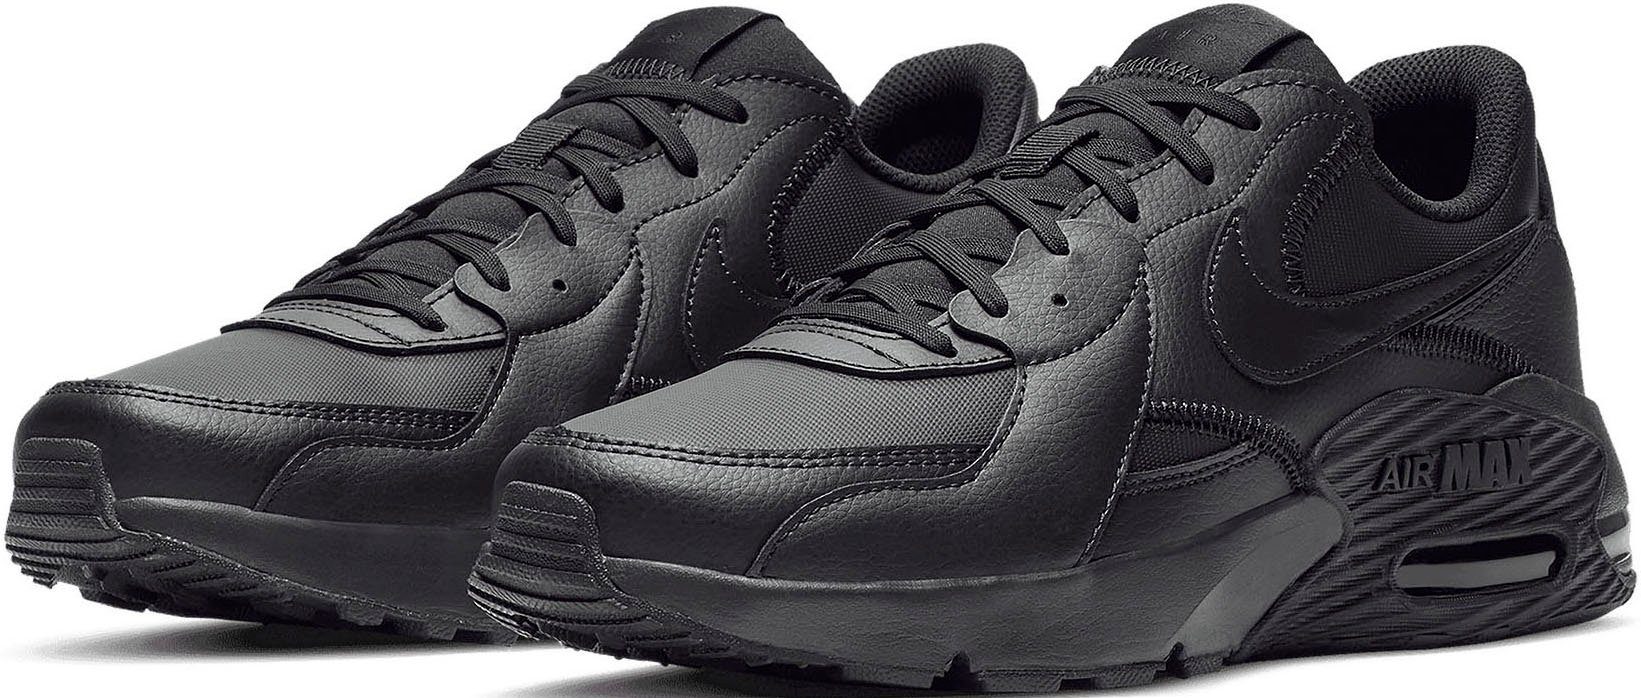 Nike Sportswear »Air Max Excee Leather« Sneaker | OTTO